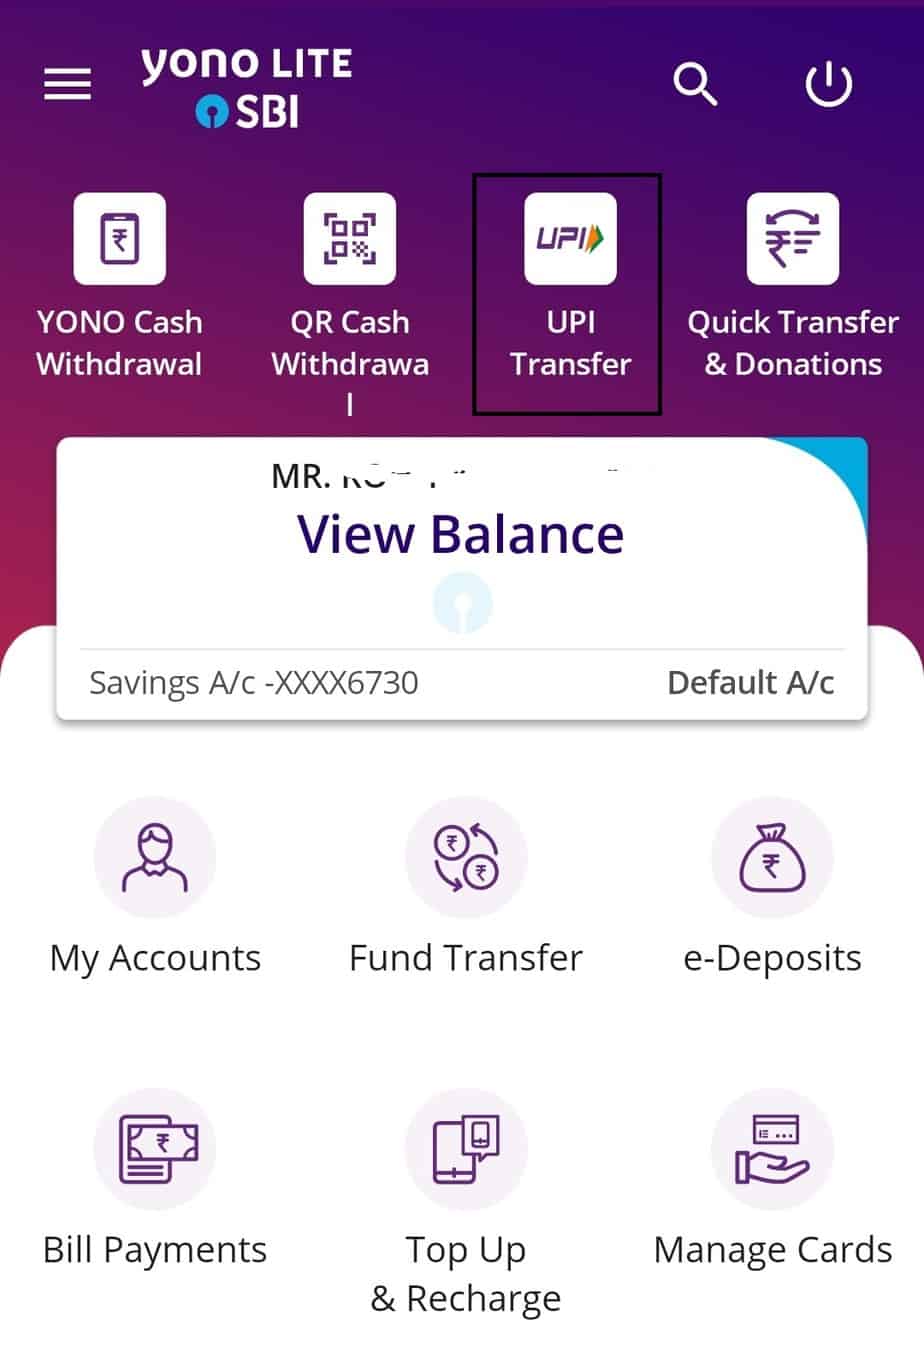 How to Check UPI Payment History?